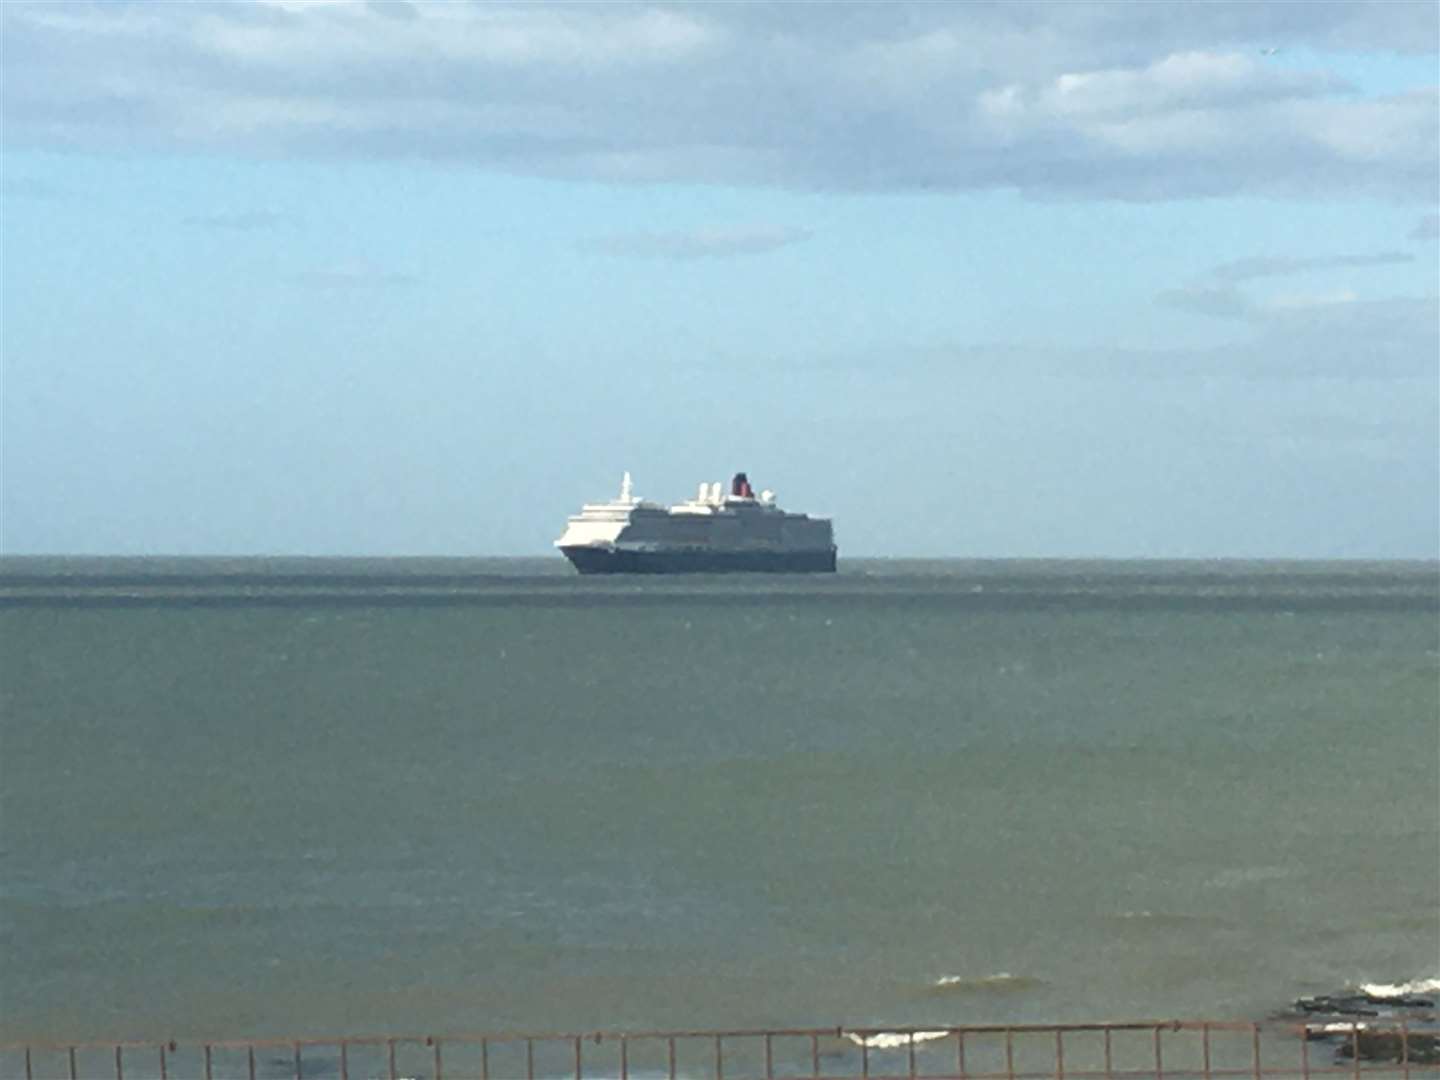 The Queen Victoria, a Cunard Line cruise ship, just off Botany Bay